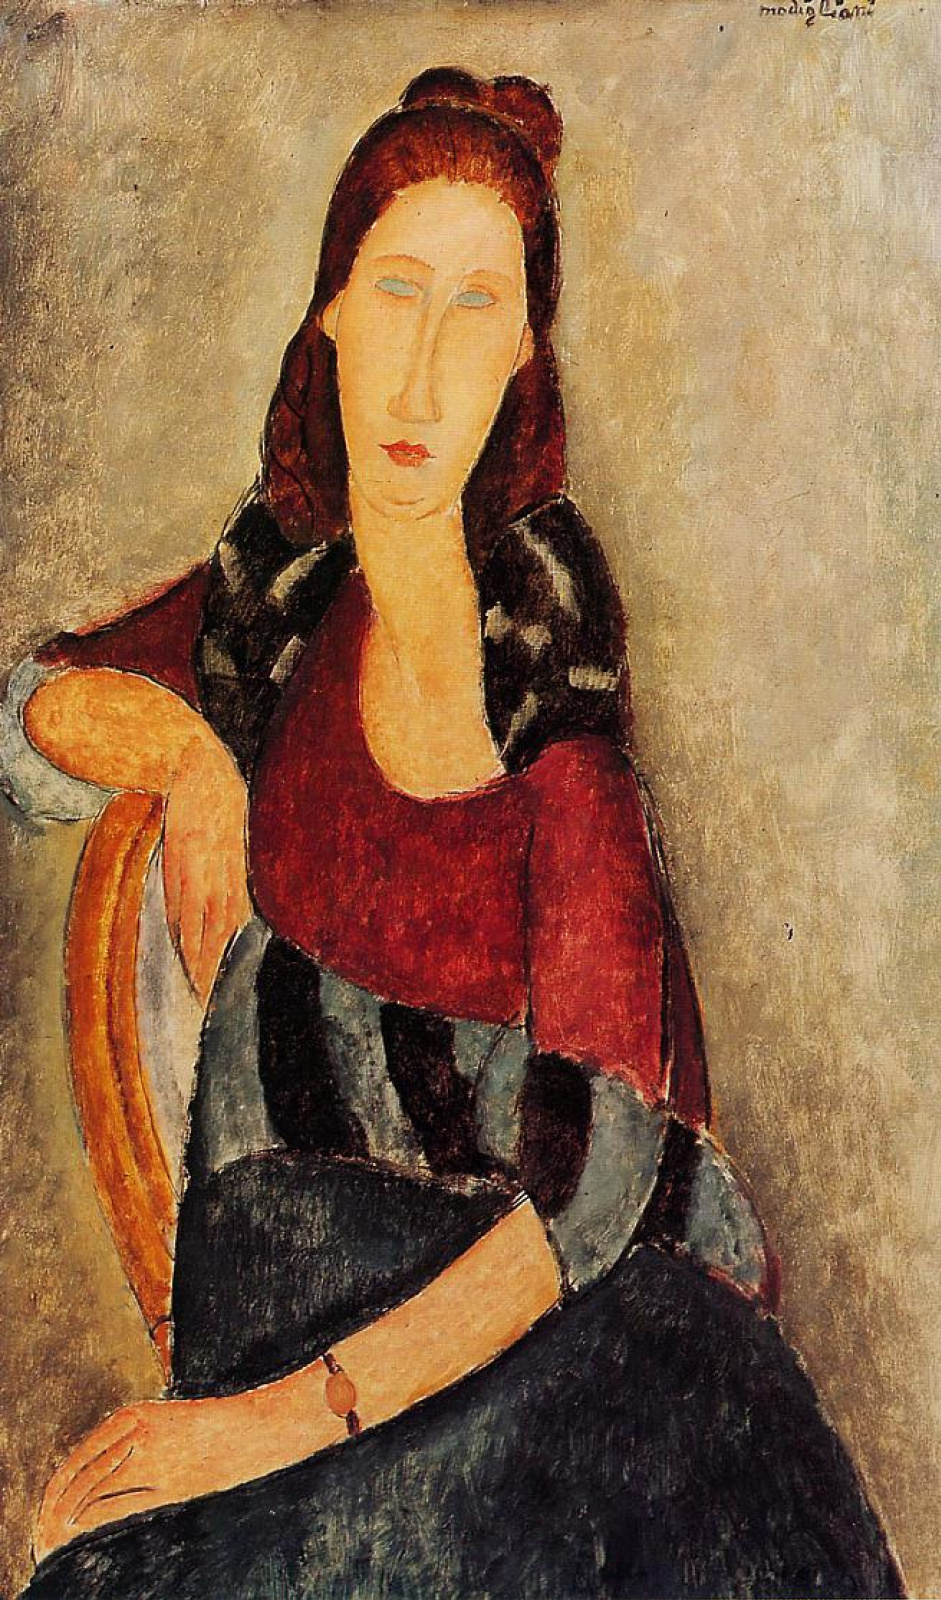 Amedeo Modigliani. Seated portrait of Jeanne hébuterne, resting on the back of the chair